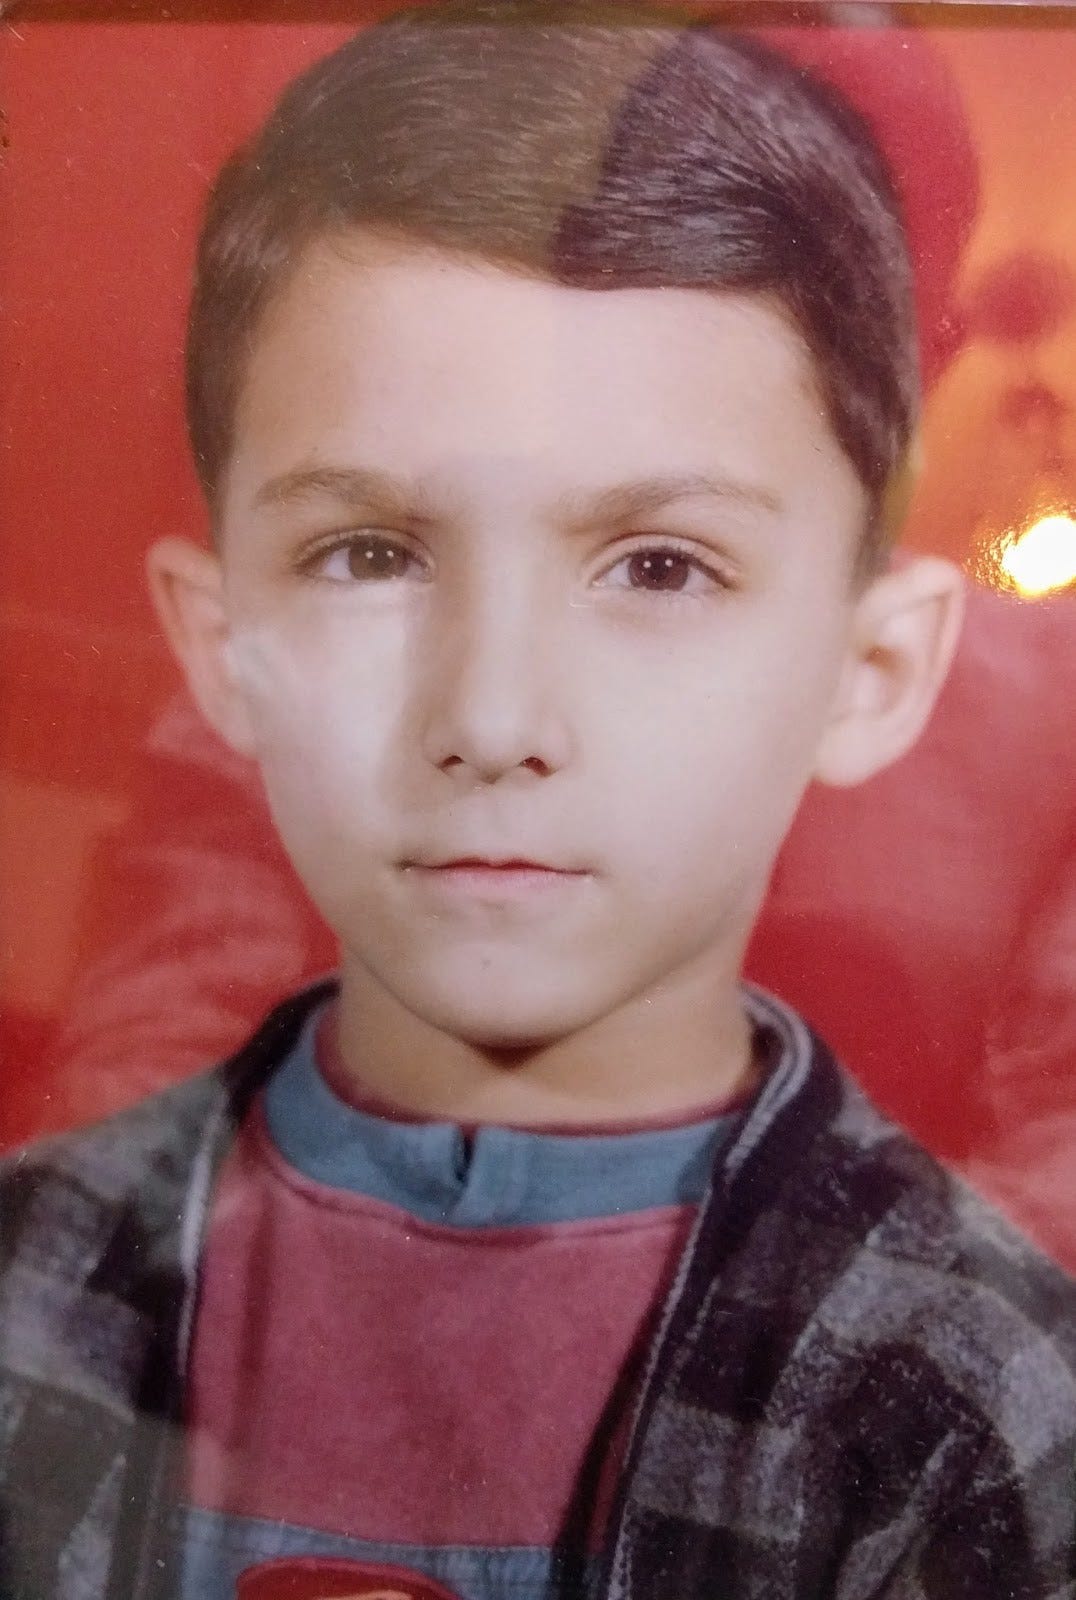 Portrait of child me with a serious expression, wearing a red top and a checkered grey cardigan, against a red background